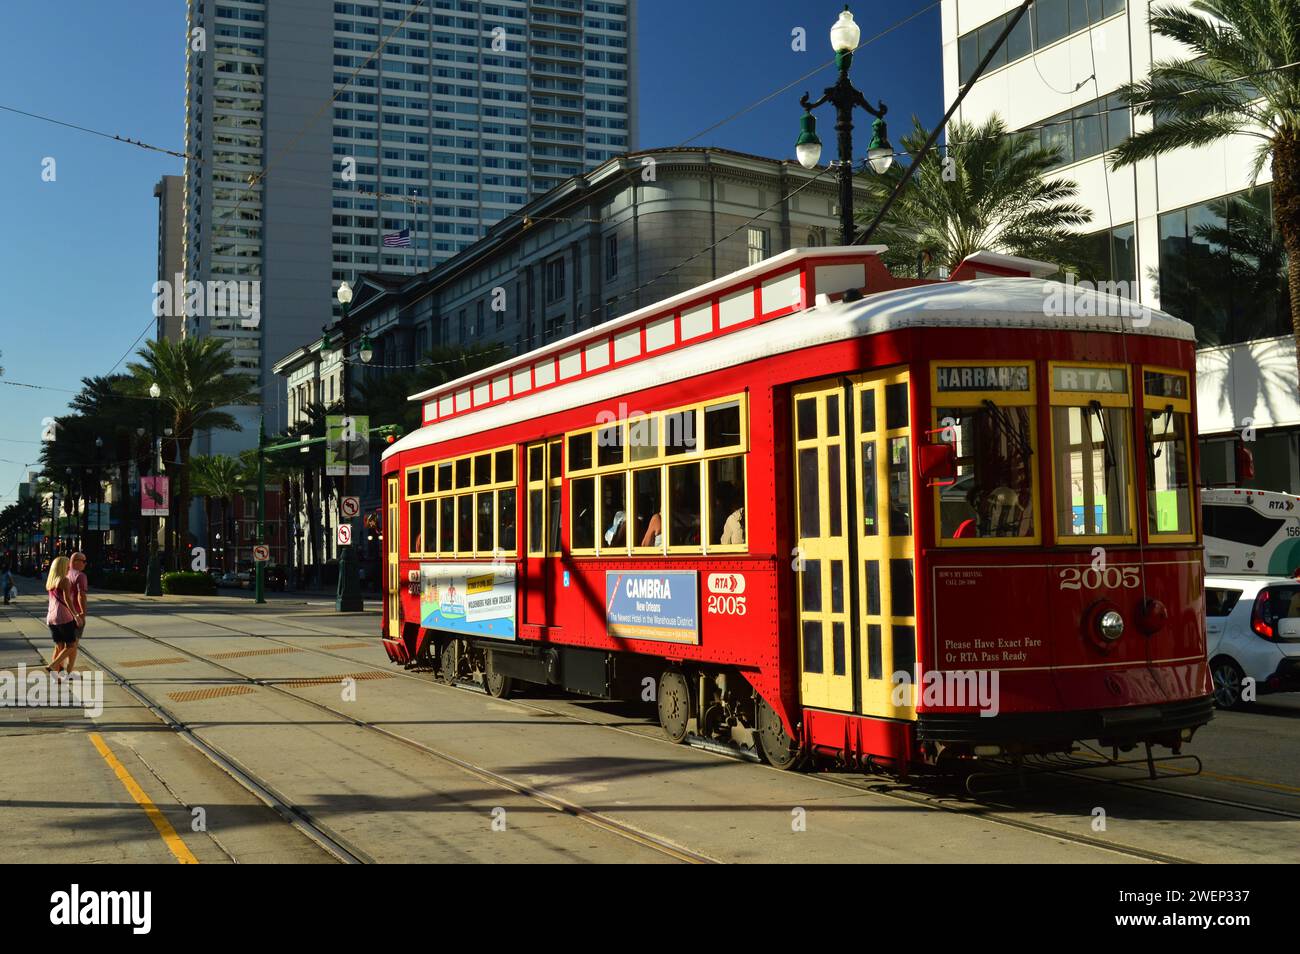 A classic and historic red trolley streetcar glides through the downtown business district of New Orleans Stock Photo